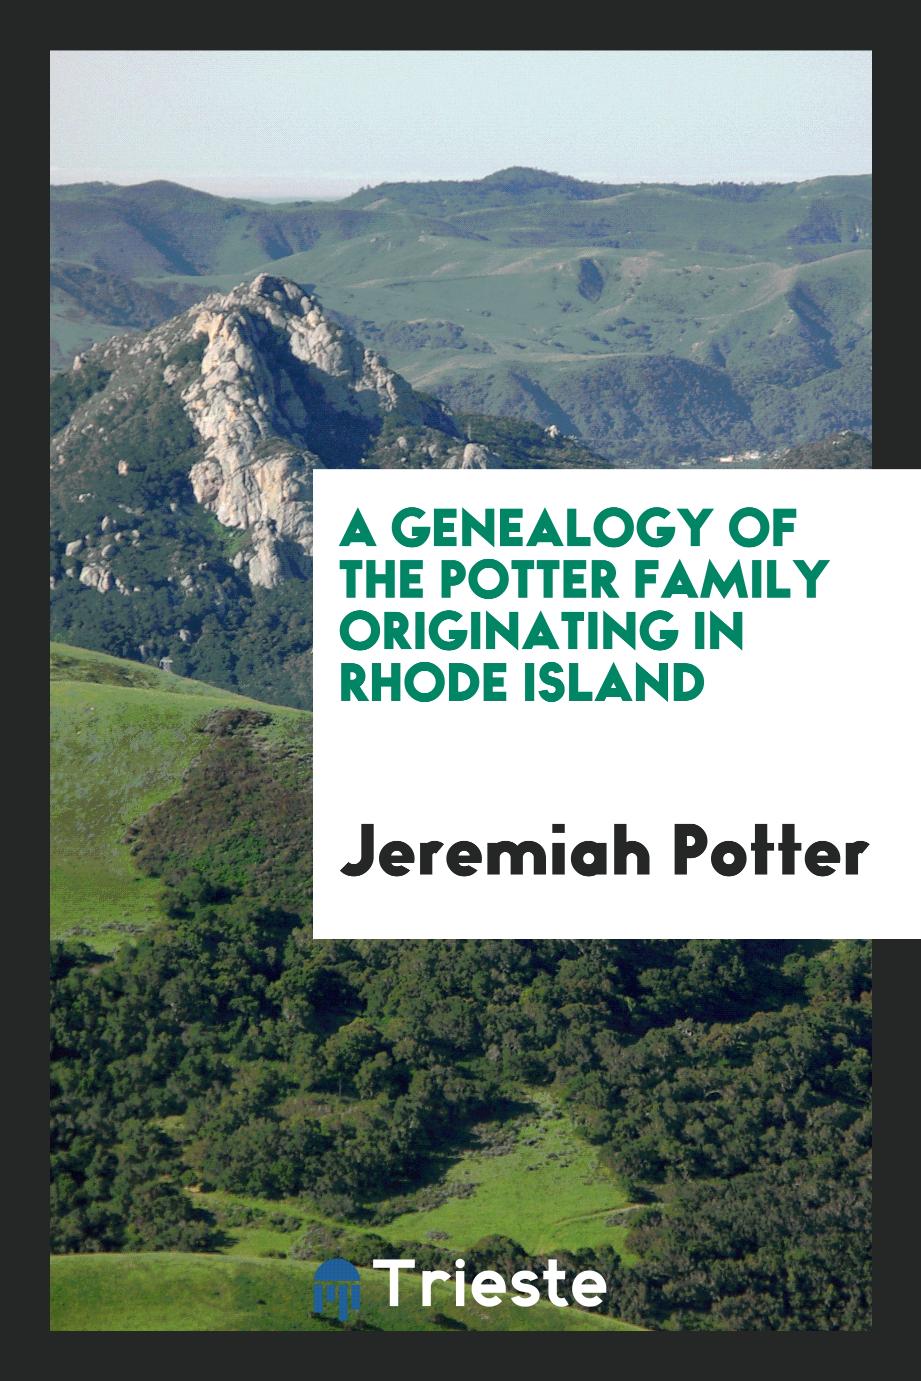 A Genealogy of the Potter Family Originating in Rhode Island